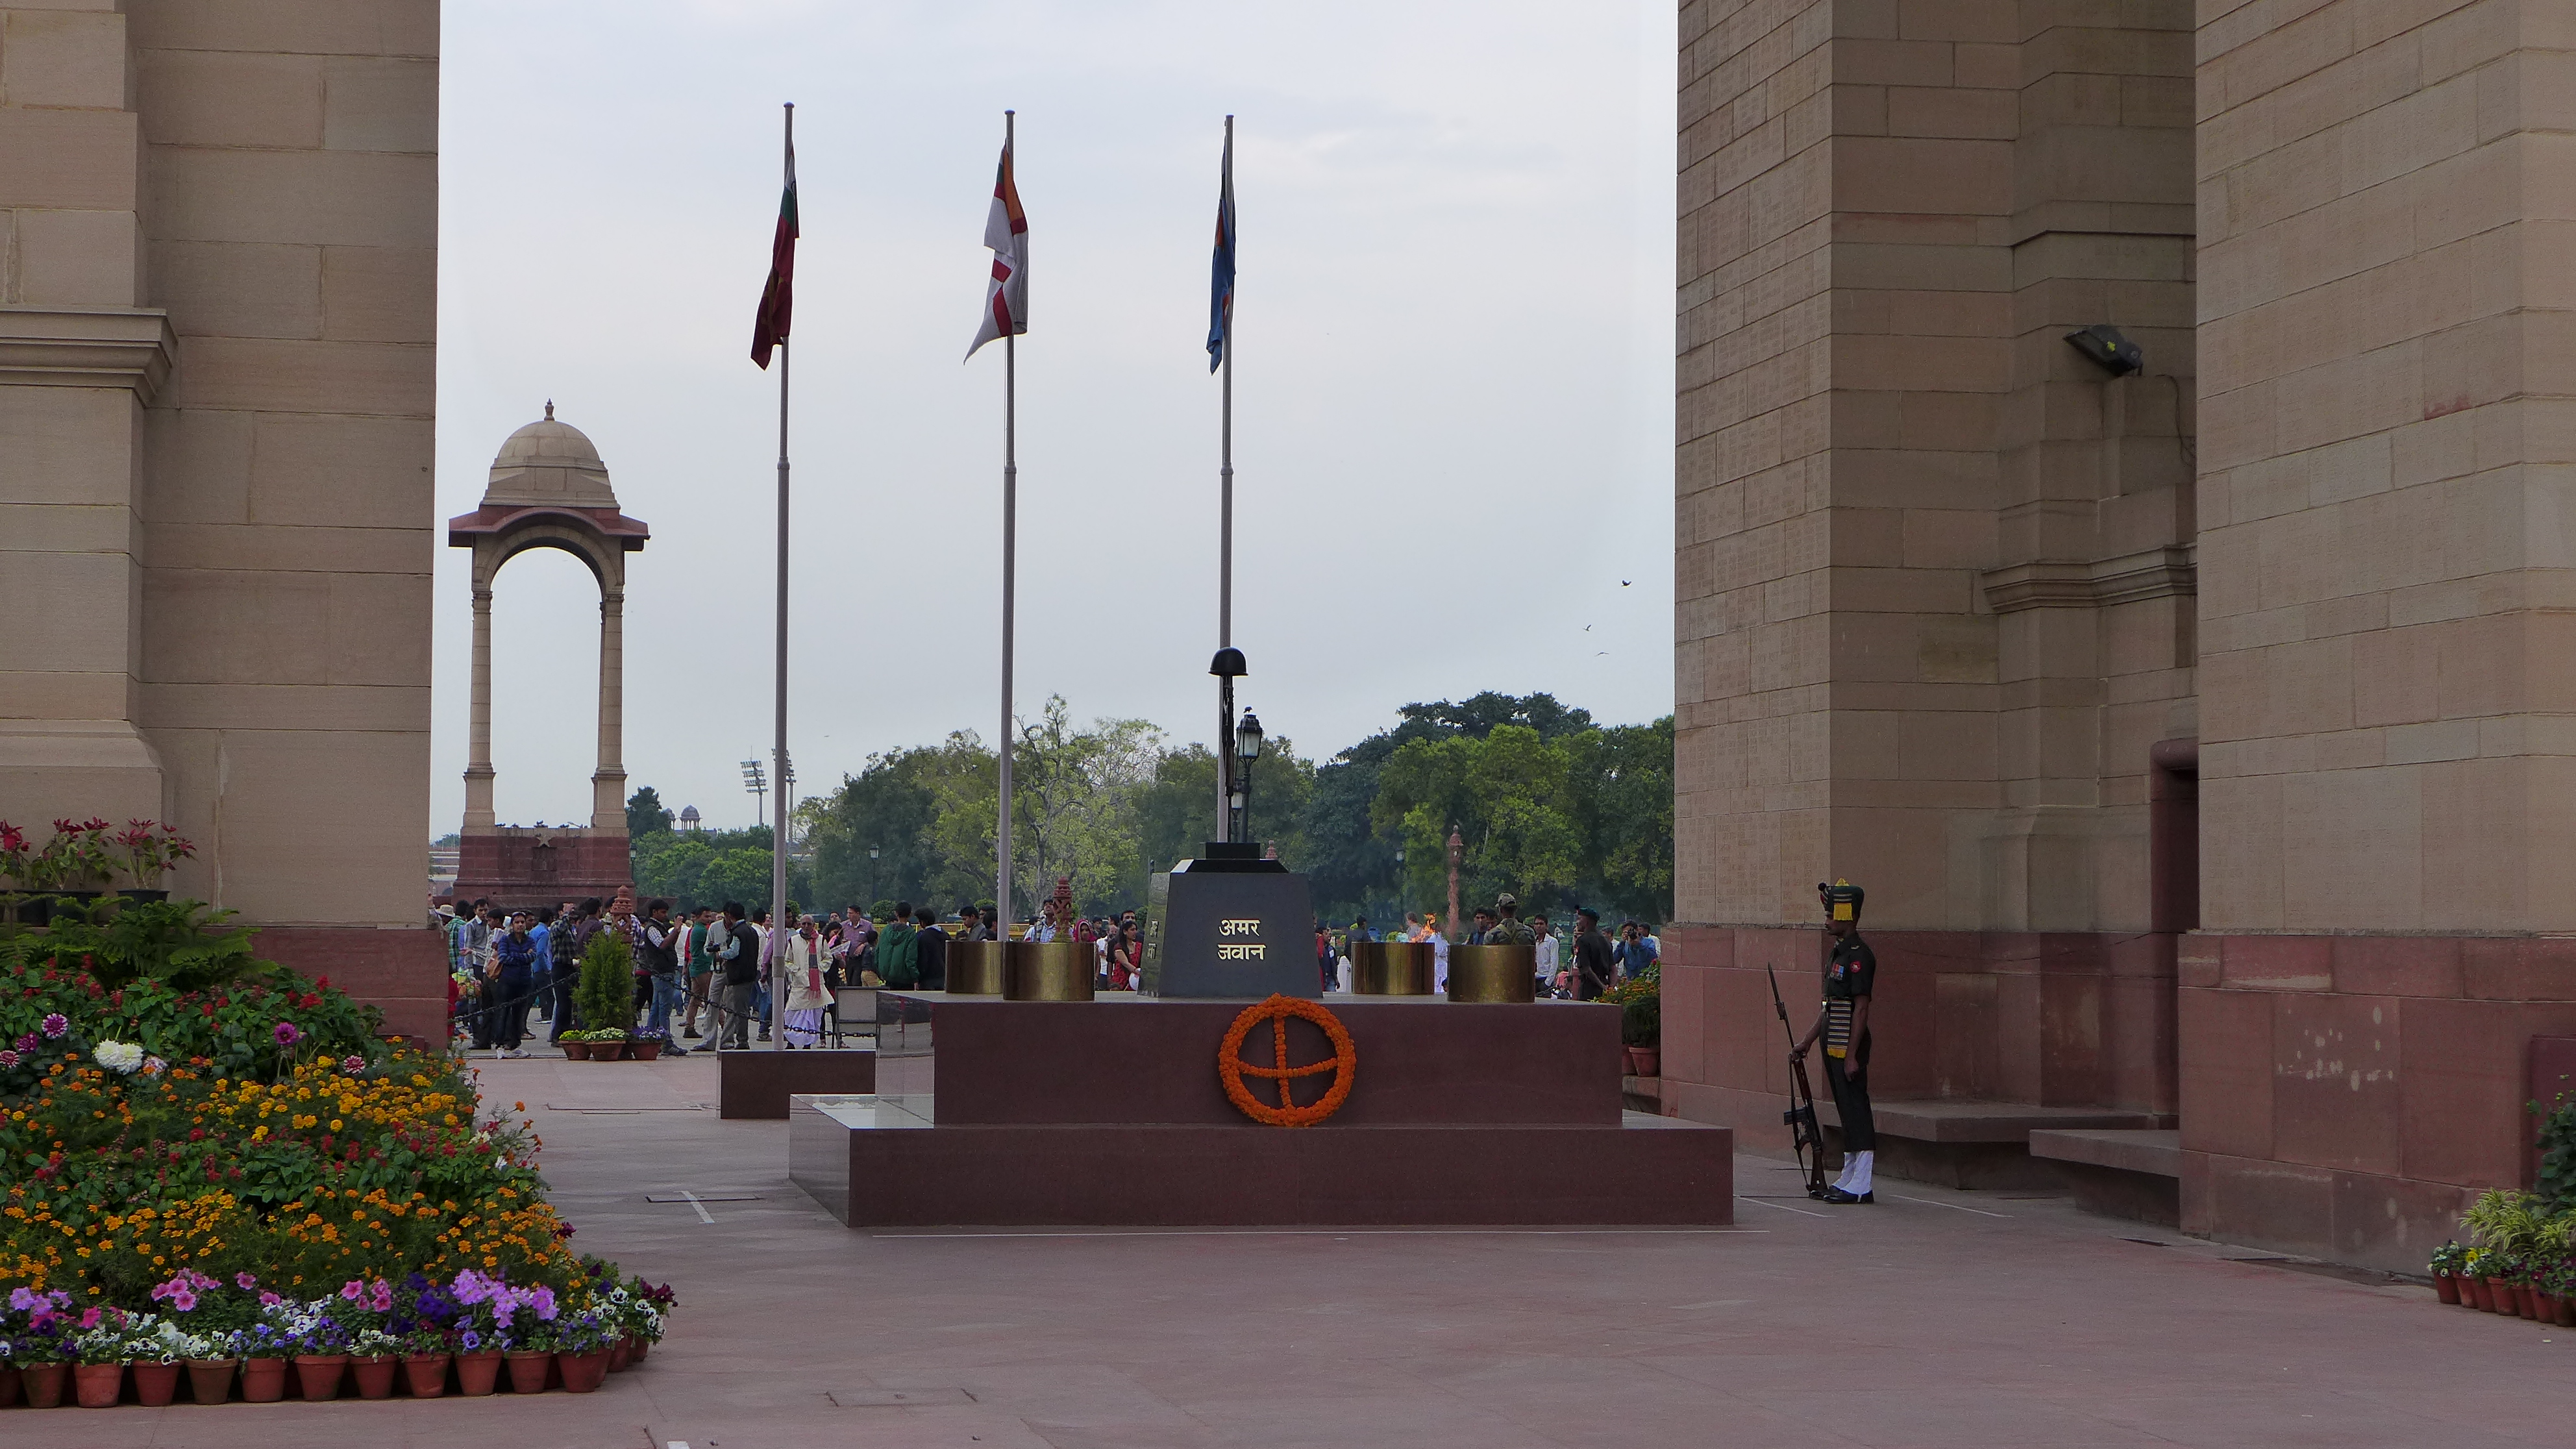 Amar Jawan Jyoti, India's Tomb of the Unknown Soldier. 